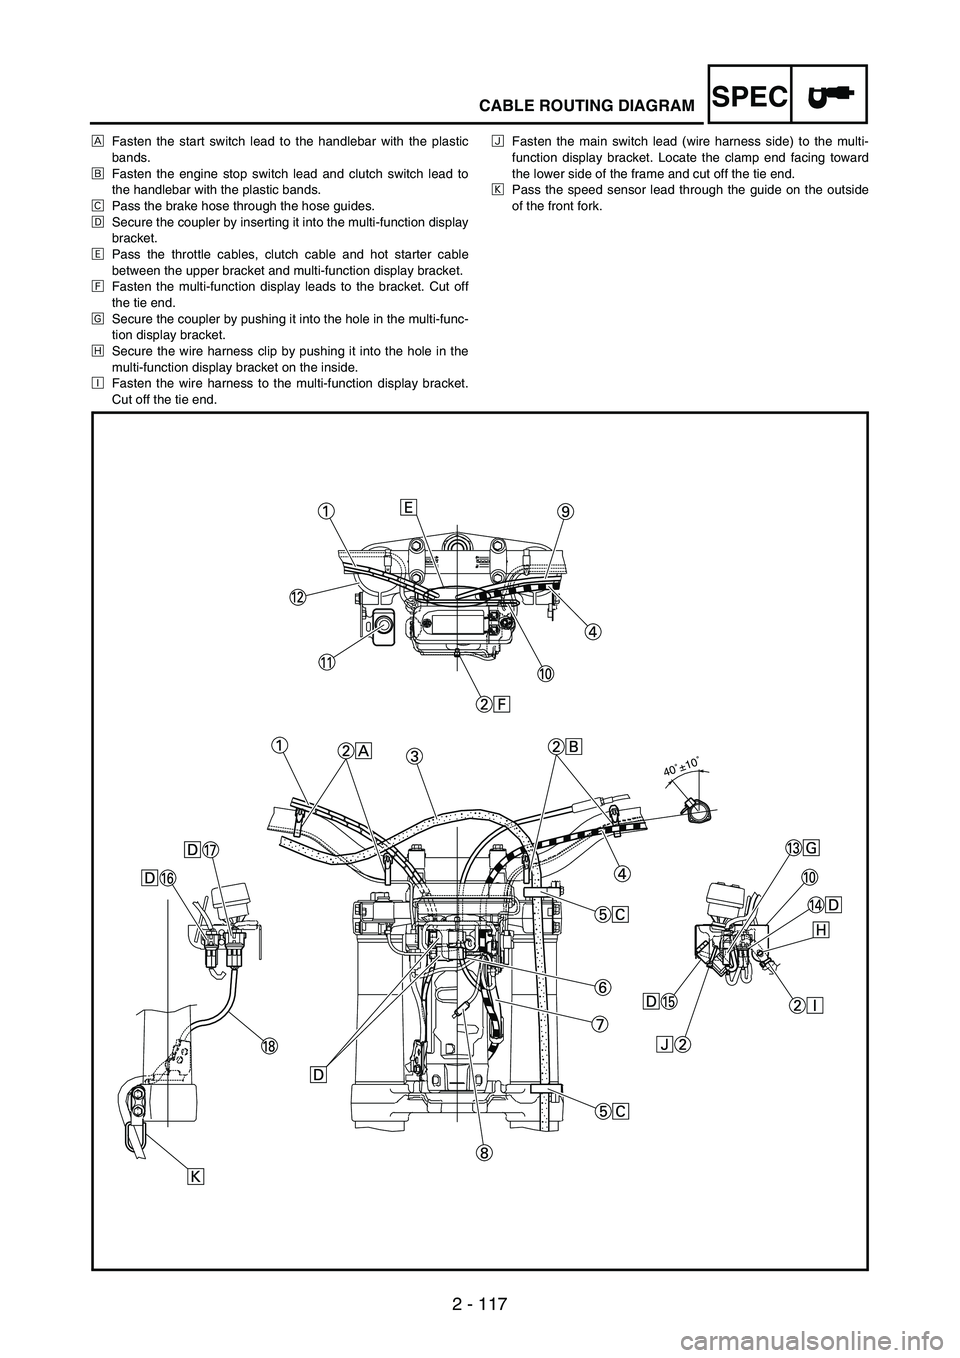 YAMAHA WR 250F 2007  Manuale duso (in Italian) 2 - 117
SPECCABLE ROUTING DIAGRAM
ÈFasten the start switch lead to the handlebar with the plastic
bands.
ÉFasten the engine stop switch lead and clutch switch lead to
the handlebar with the plastic 